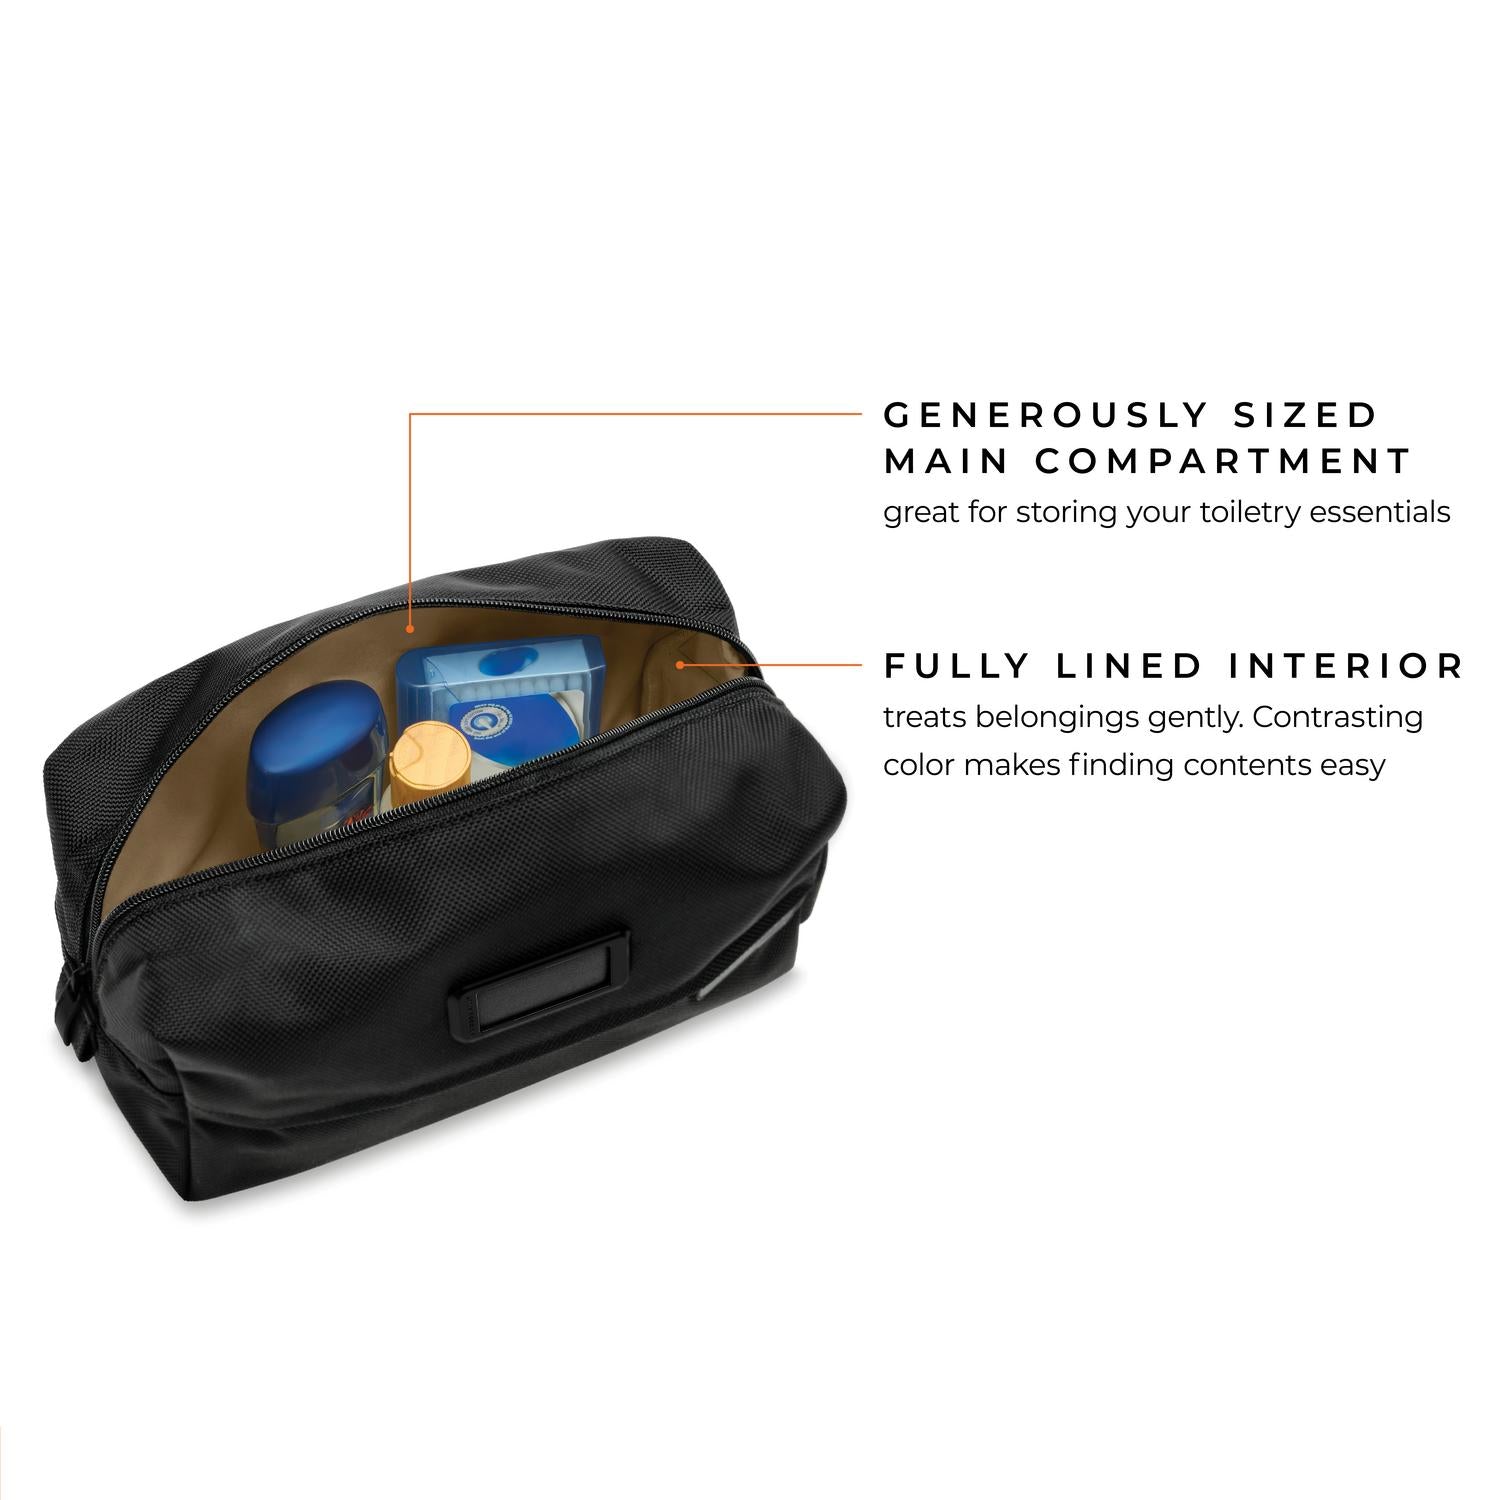 Briggs and Riley Everyday Essentials Kit, G E N E R O U S L Y S I Z E D  M A I N C O M P A R T M E N T  great for storing your toiletry essentials, FULLY LINED INTERIOR treats belongings gently. Contrasting  color makes finding contents easy #color_black